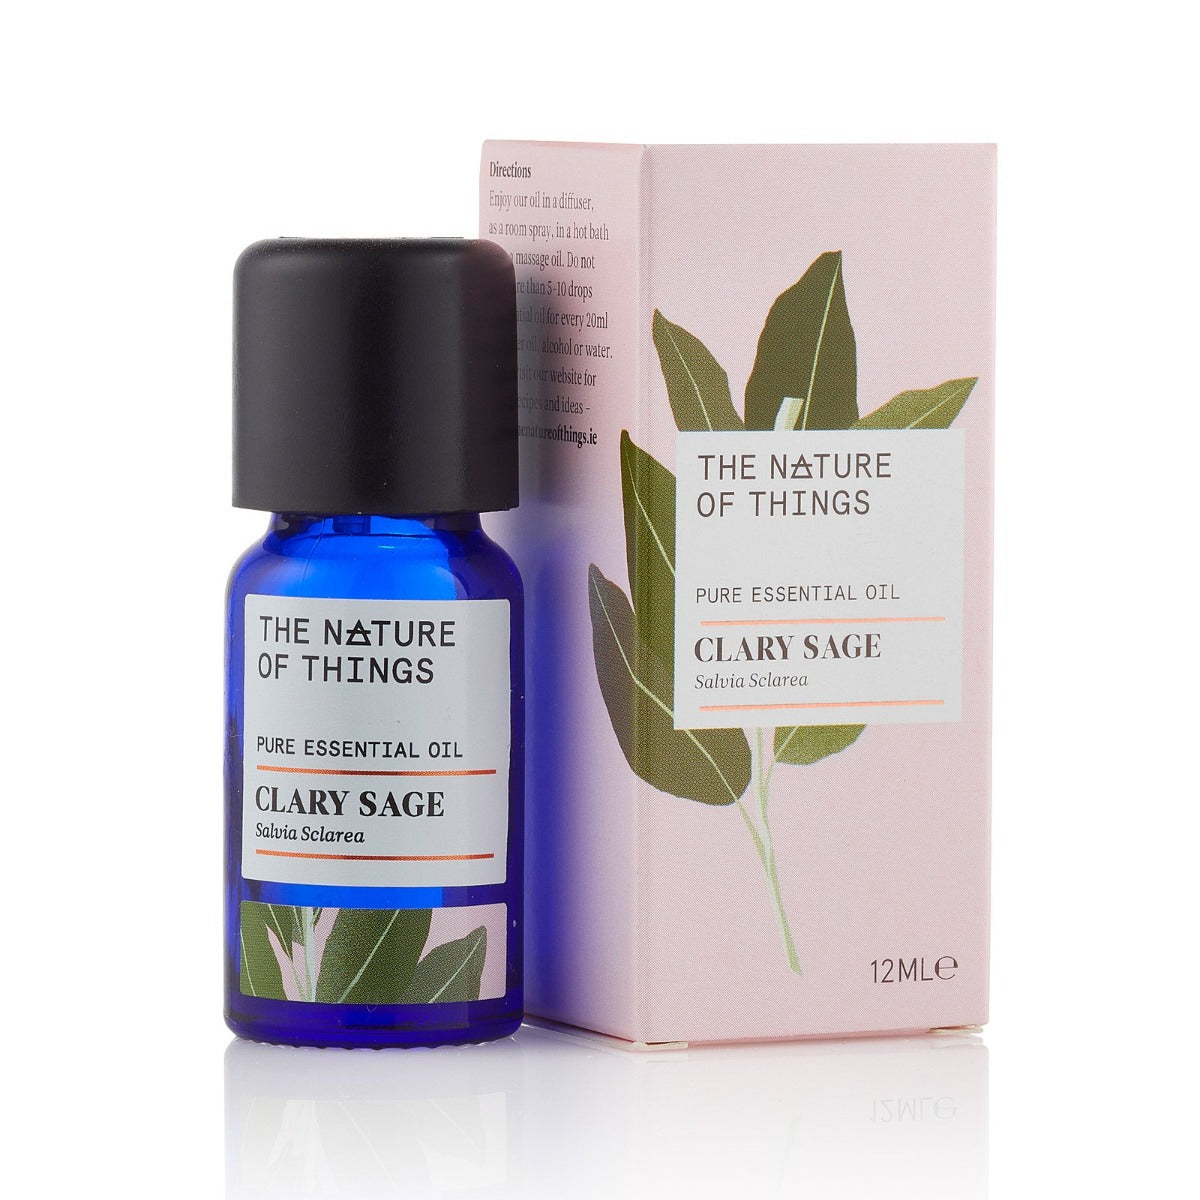 Clary Sage Essential Oil from The Nature of Things